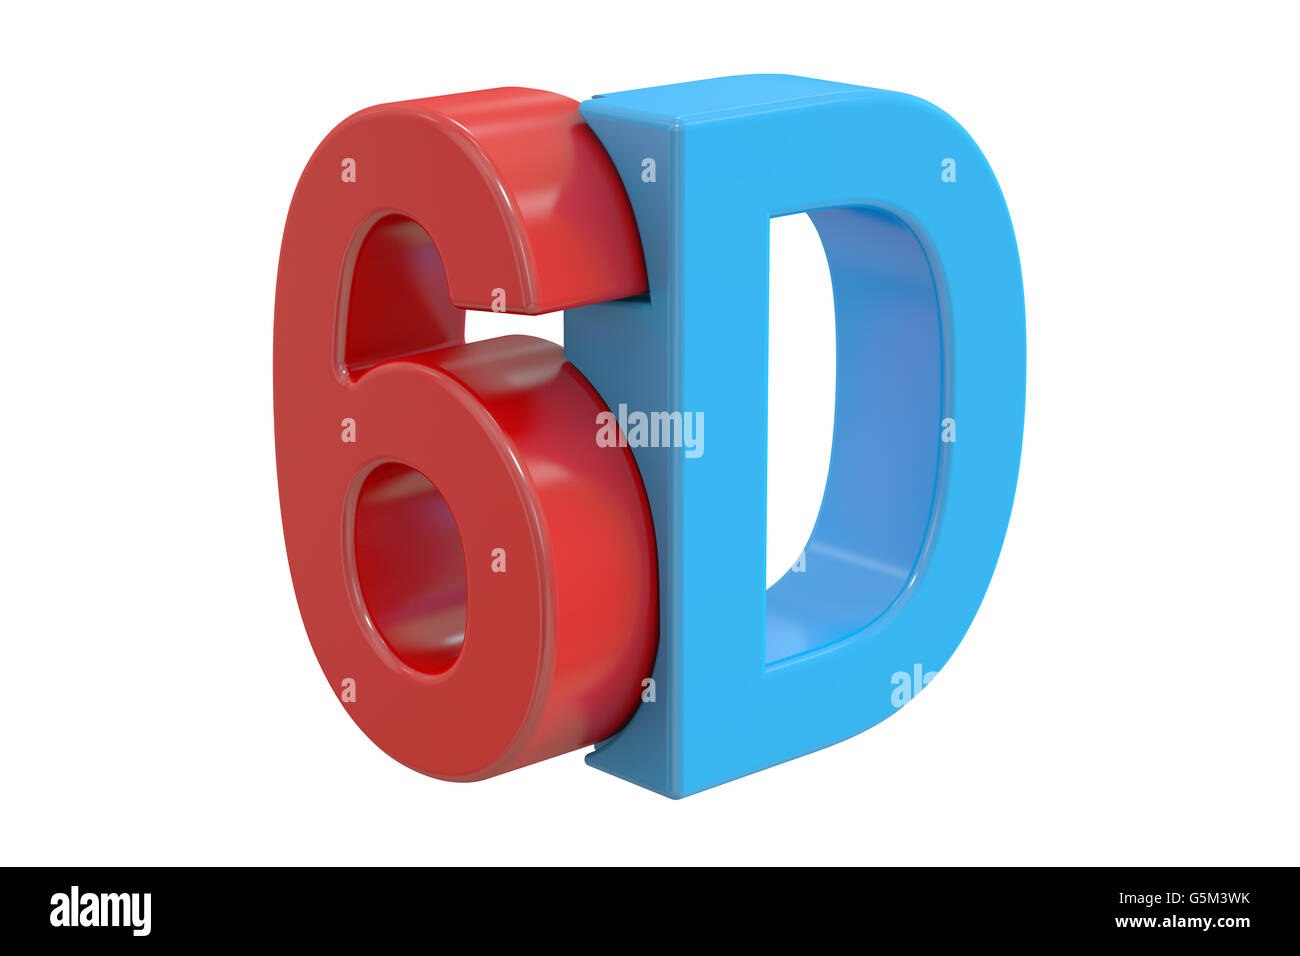 6D logo, 3D rendering isolated on white background Stock Photo